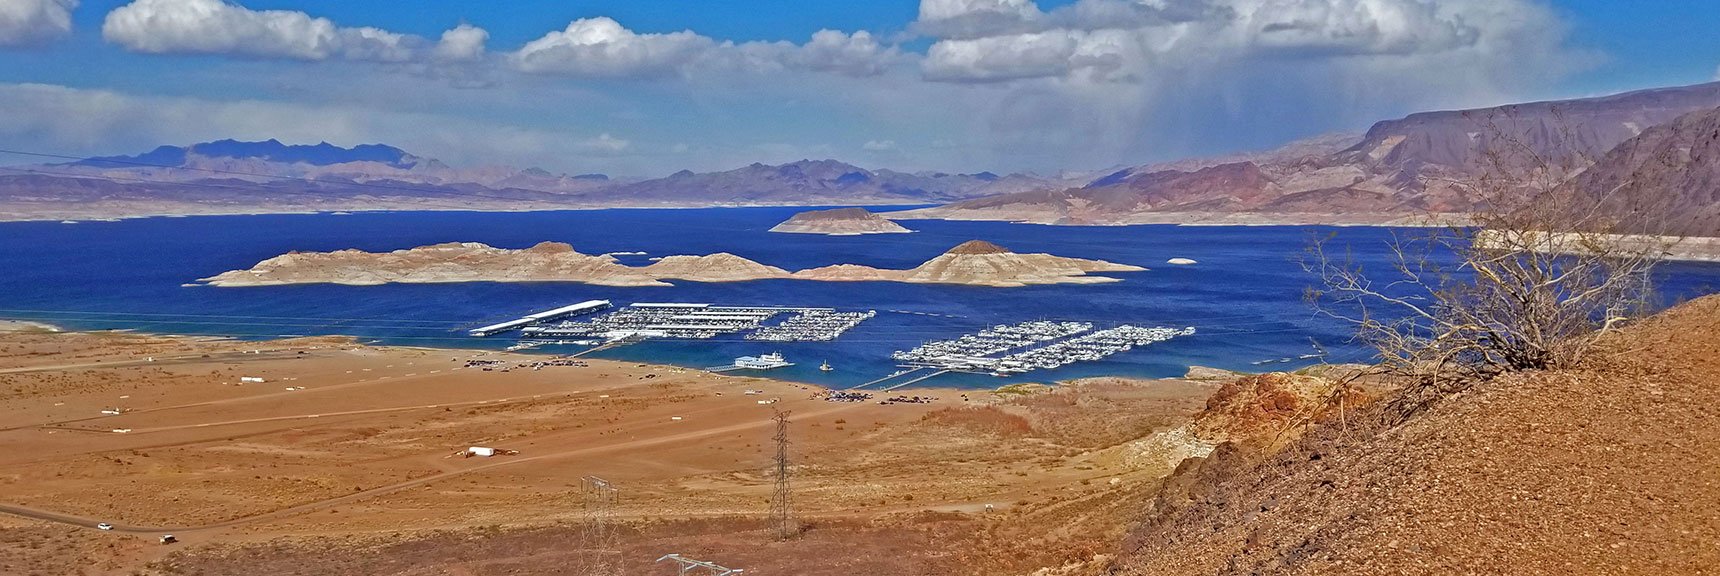 Lake Mead, Marina, Muddy Mountains in Distance to Left | Historic Railroad Trail | Lake Mead National Recreation Area, Nevada